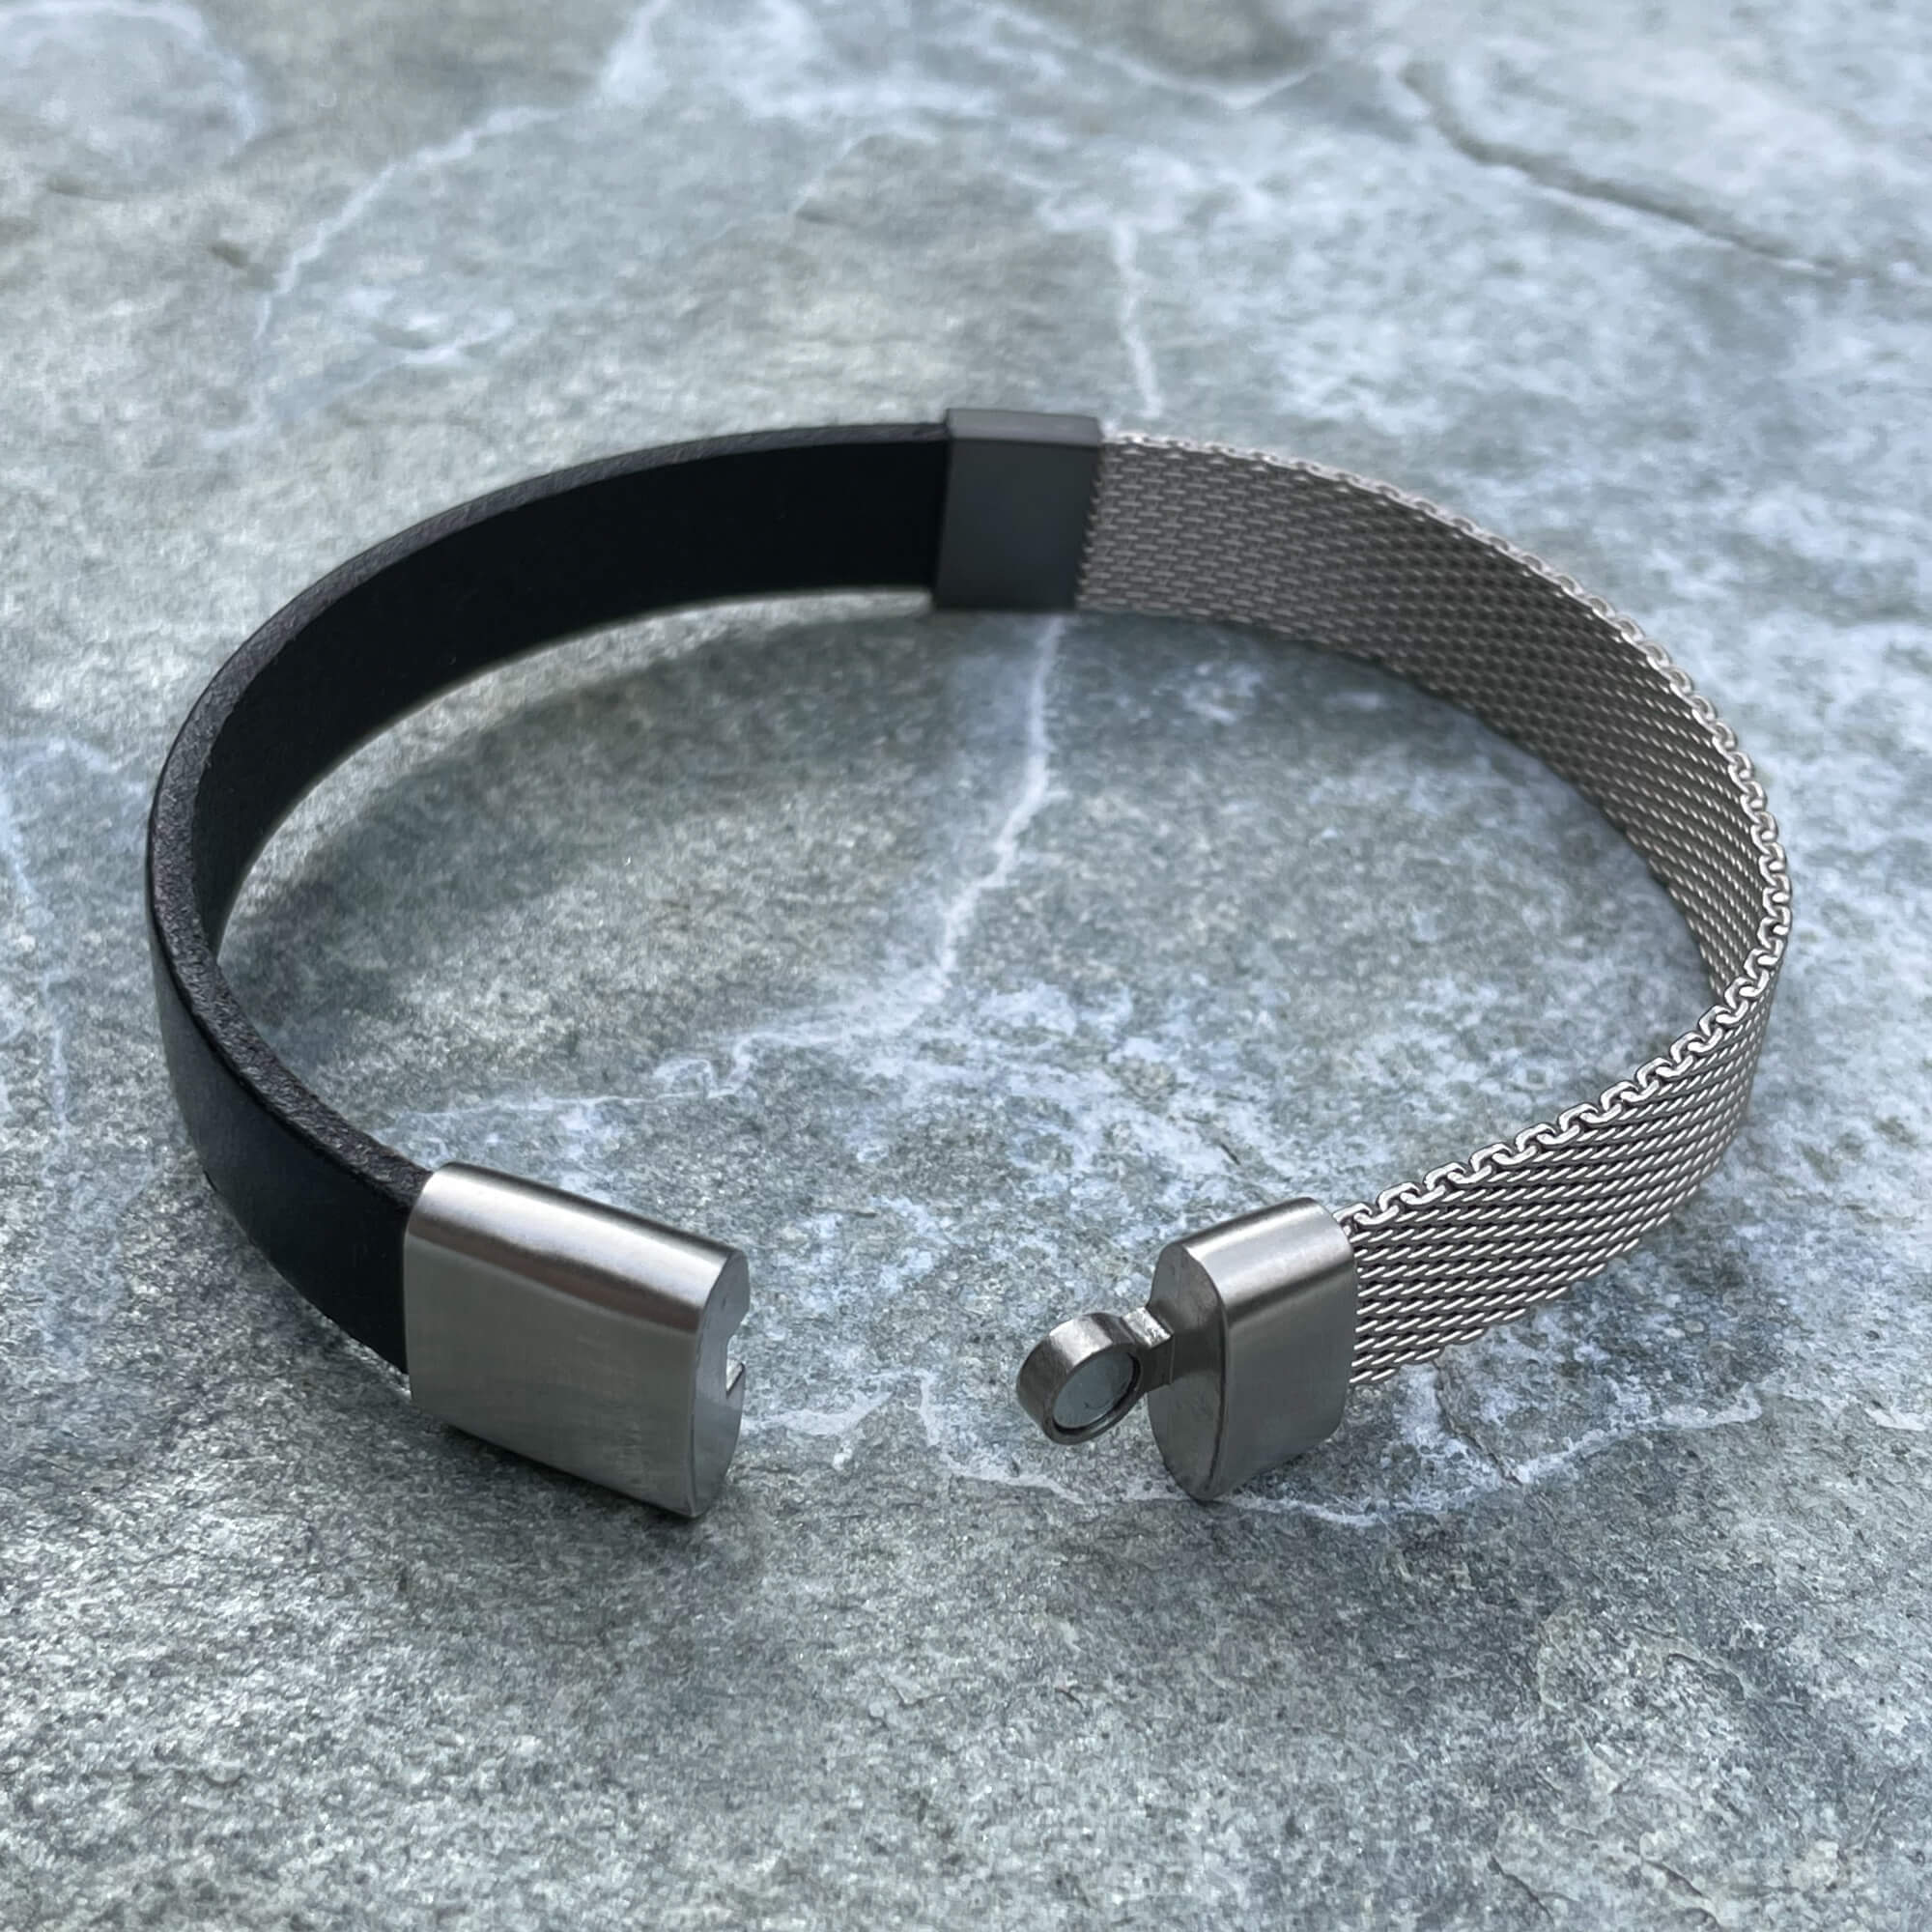 Black leather bracelet with silver braided stainless steel wire